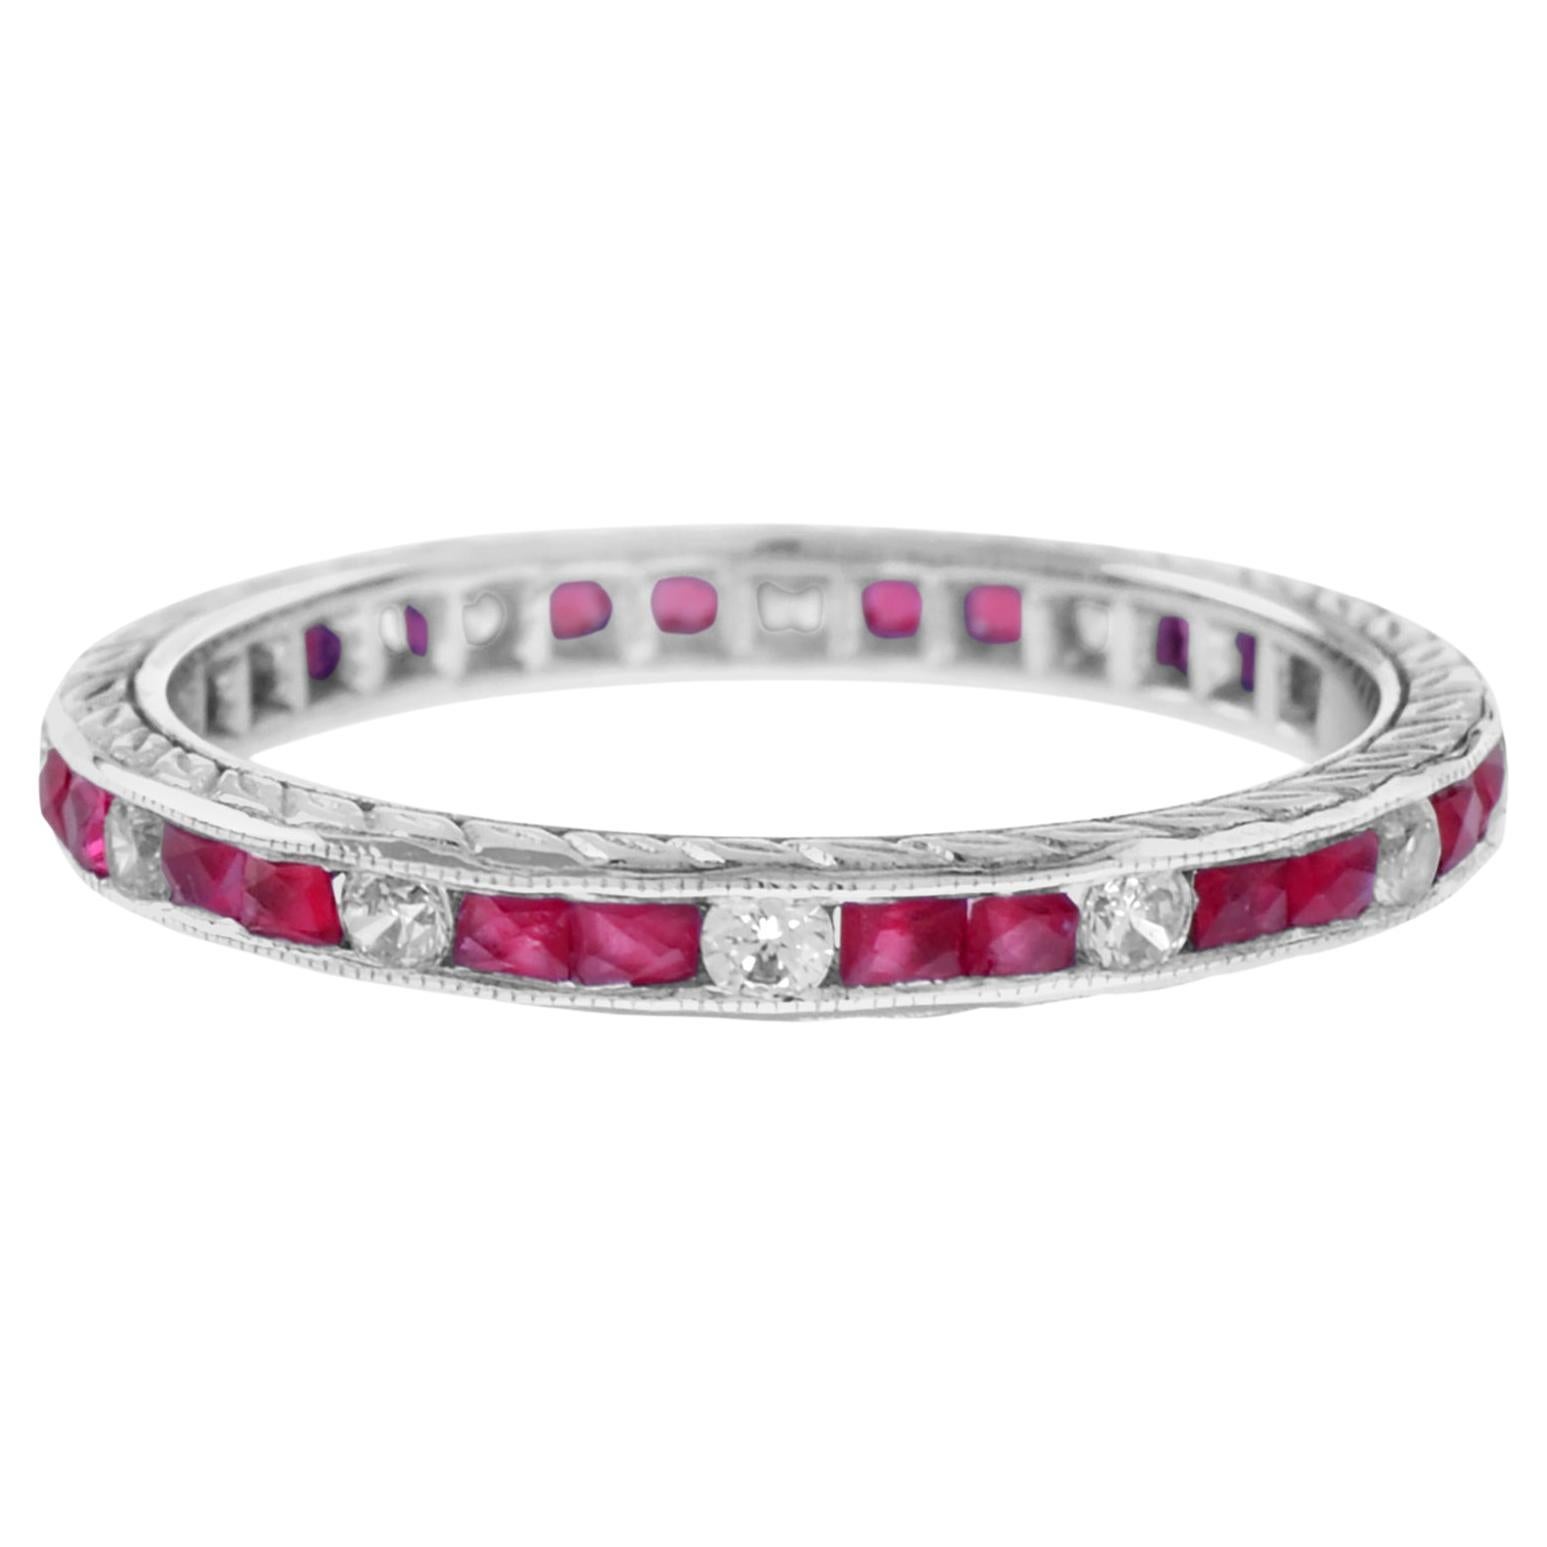 For Sale:  Alternating Double Ruby and Diamond Eternity Ring in 14K White Gold